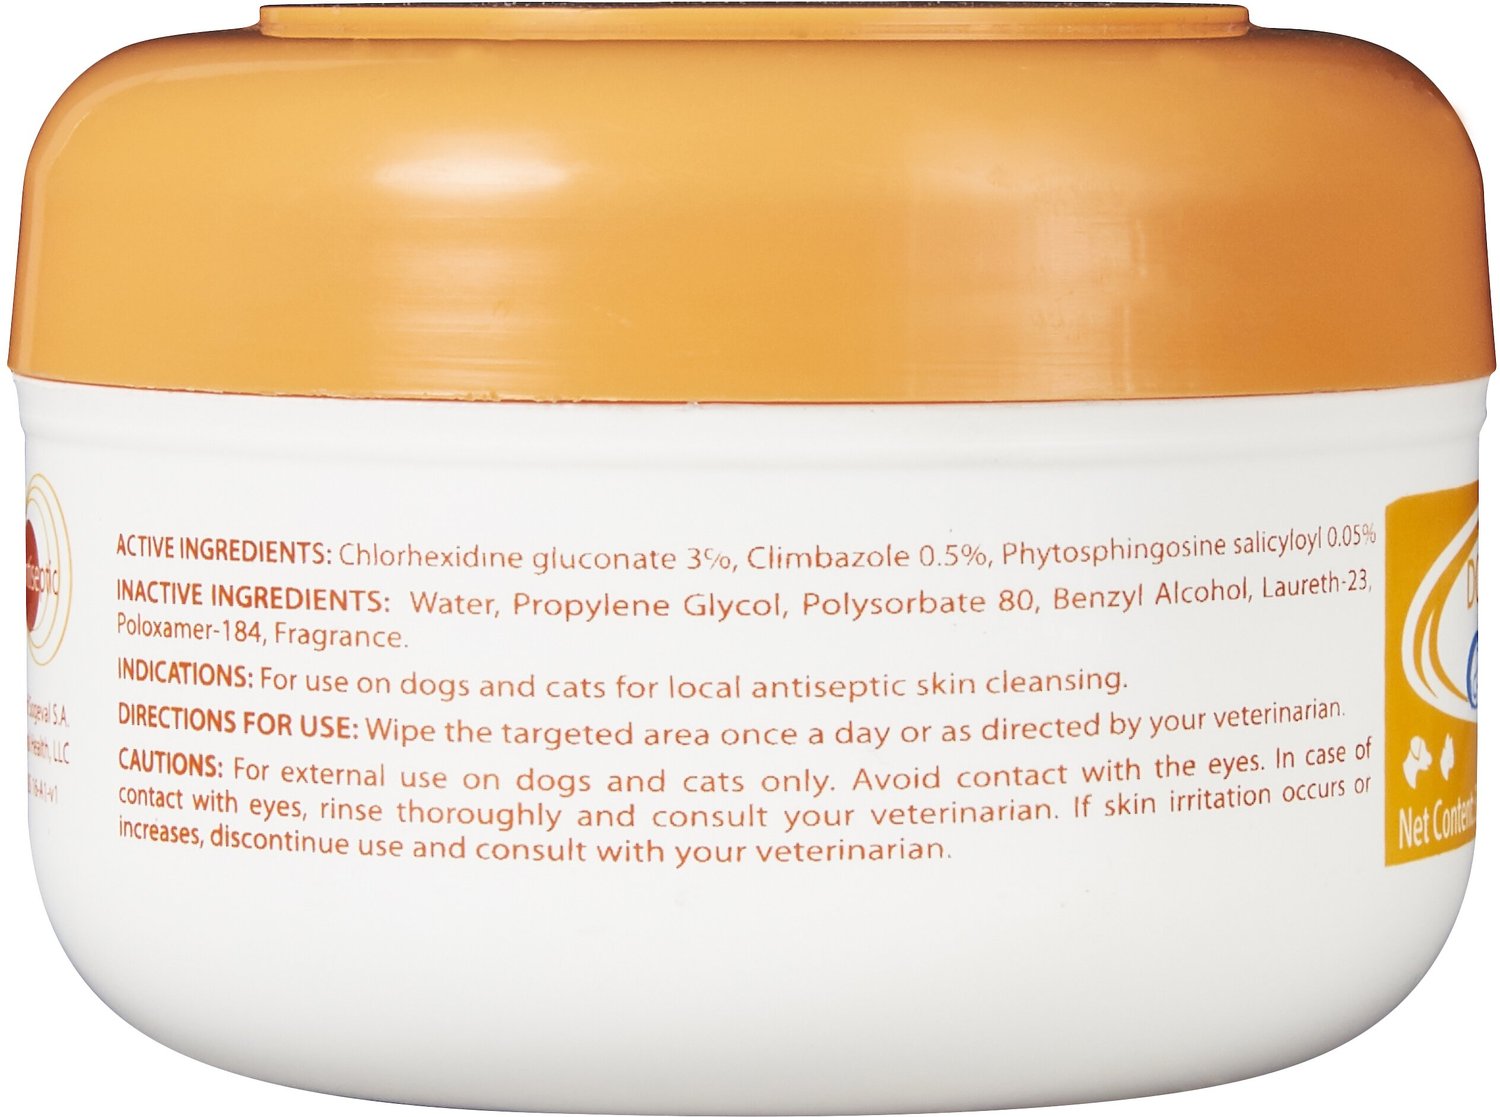 chlorhexidine pads for dogs